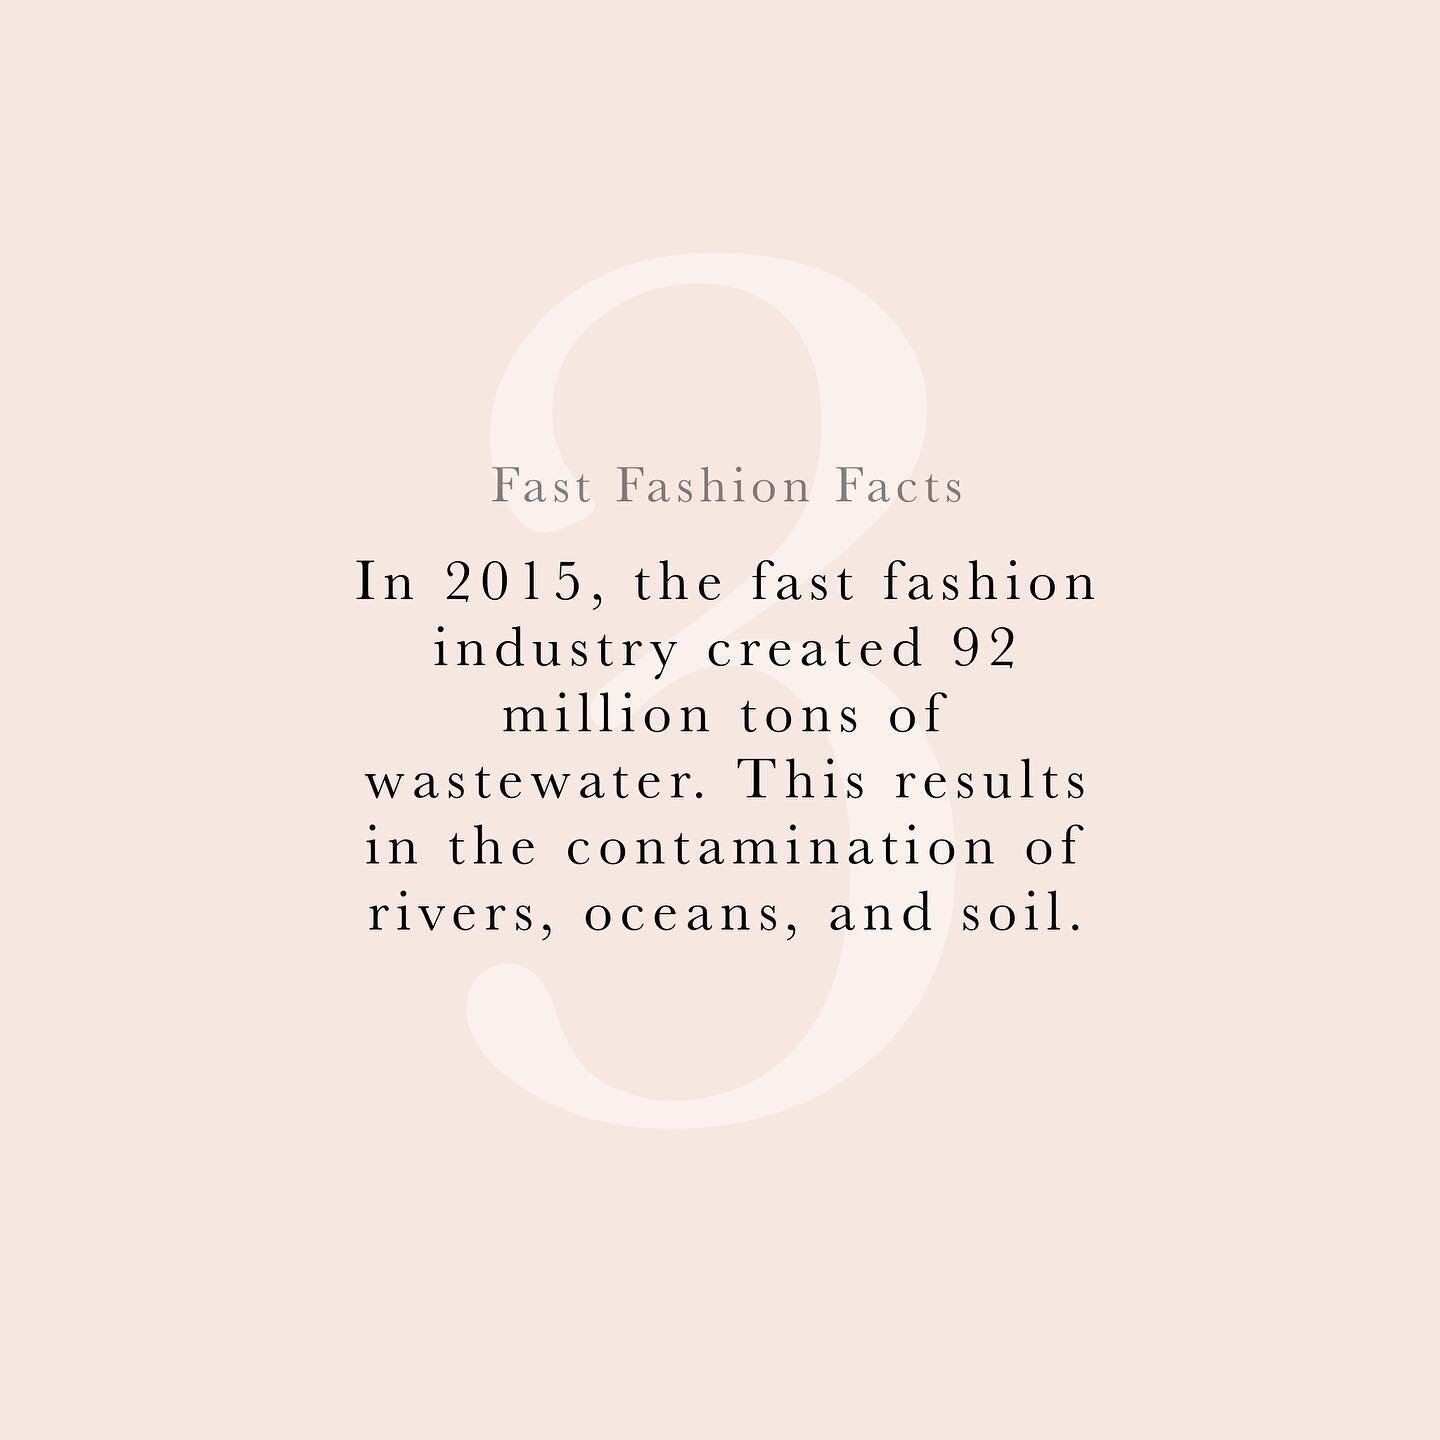 The fast fashion industry uses an unnecessary amount of water, its time we start thinking consciously before buying fast fashion.